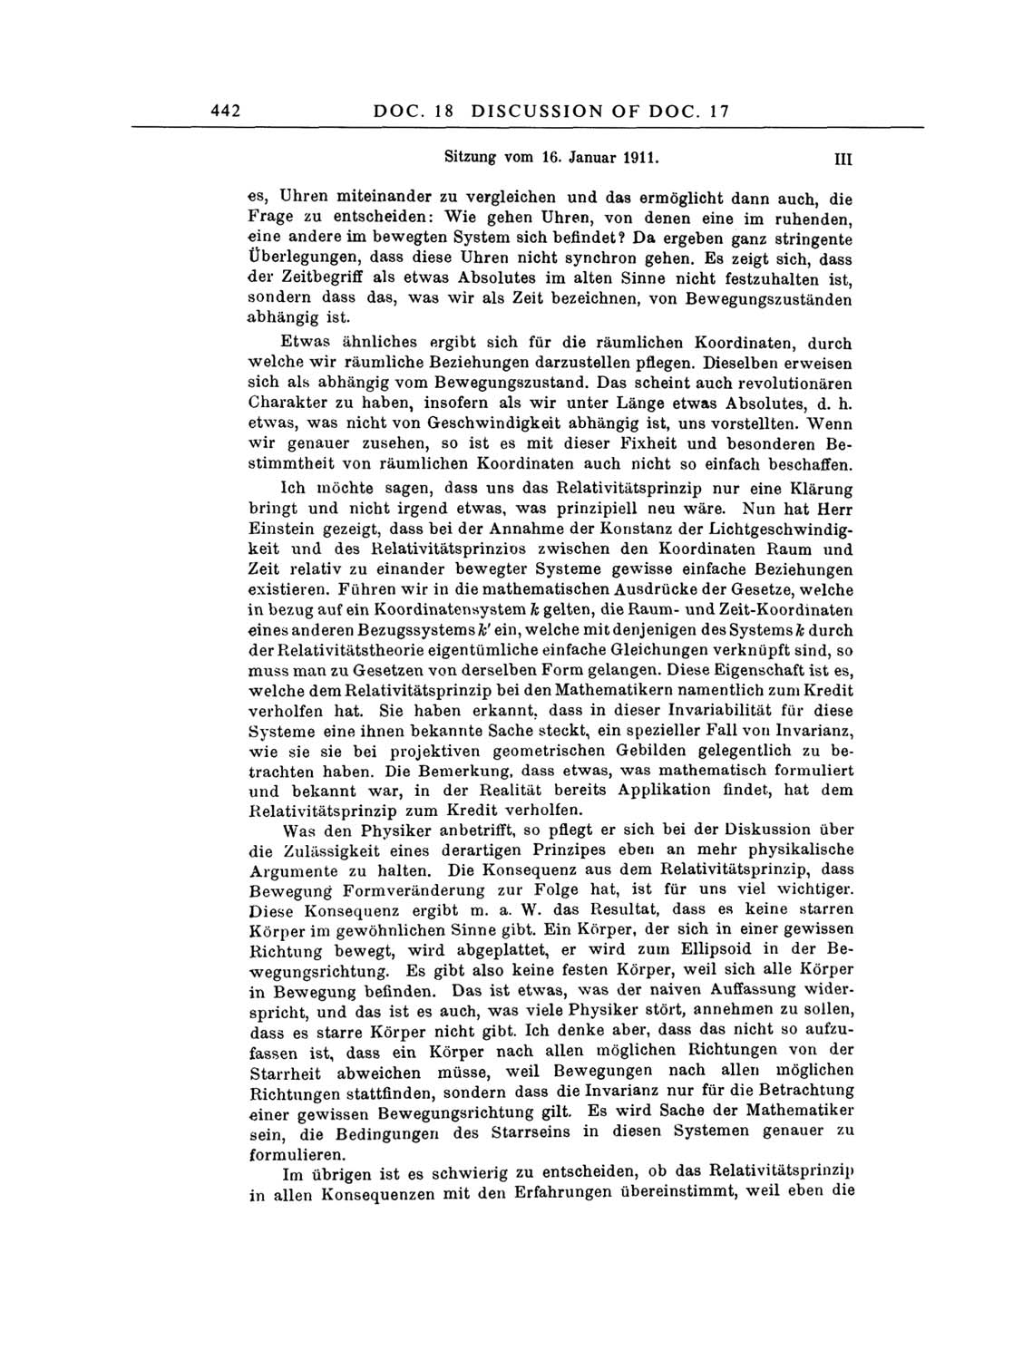 Volume 3: The Swiss Years: Writings 1909-1911 page 442